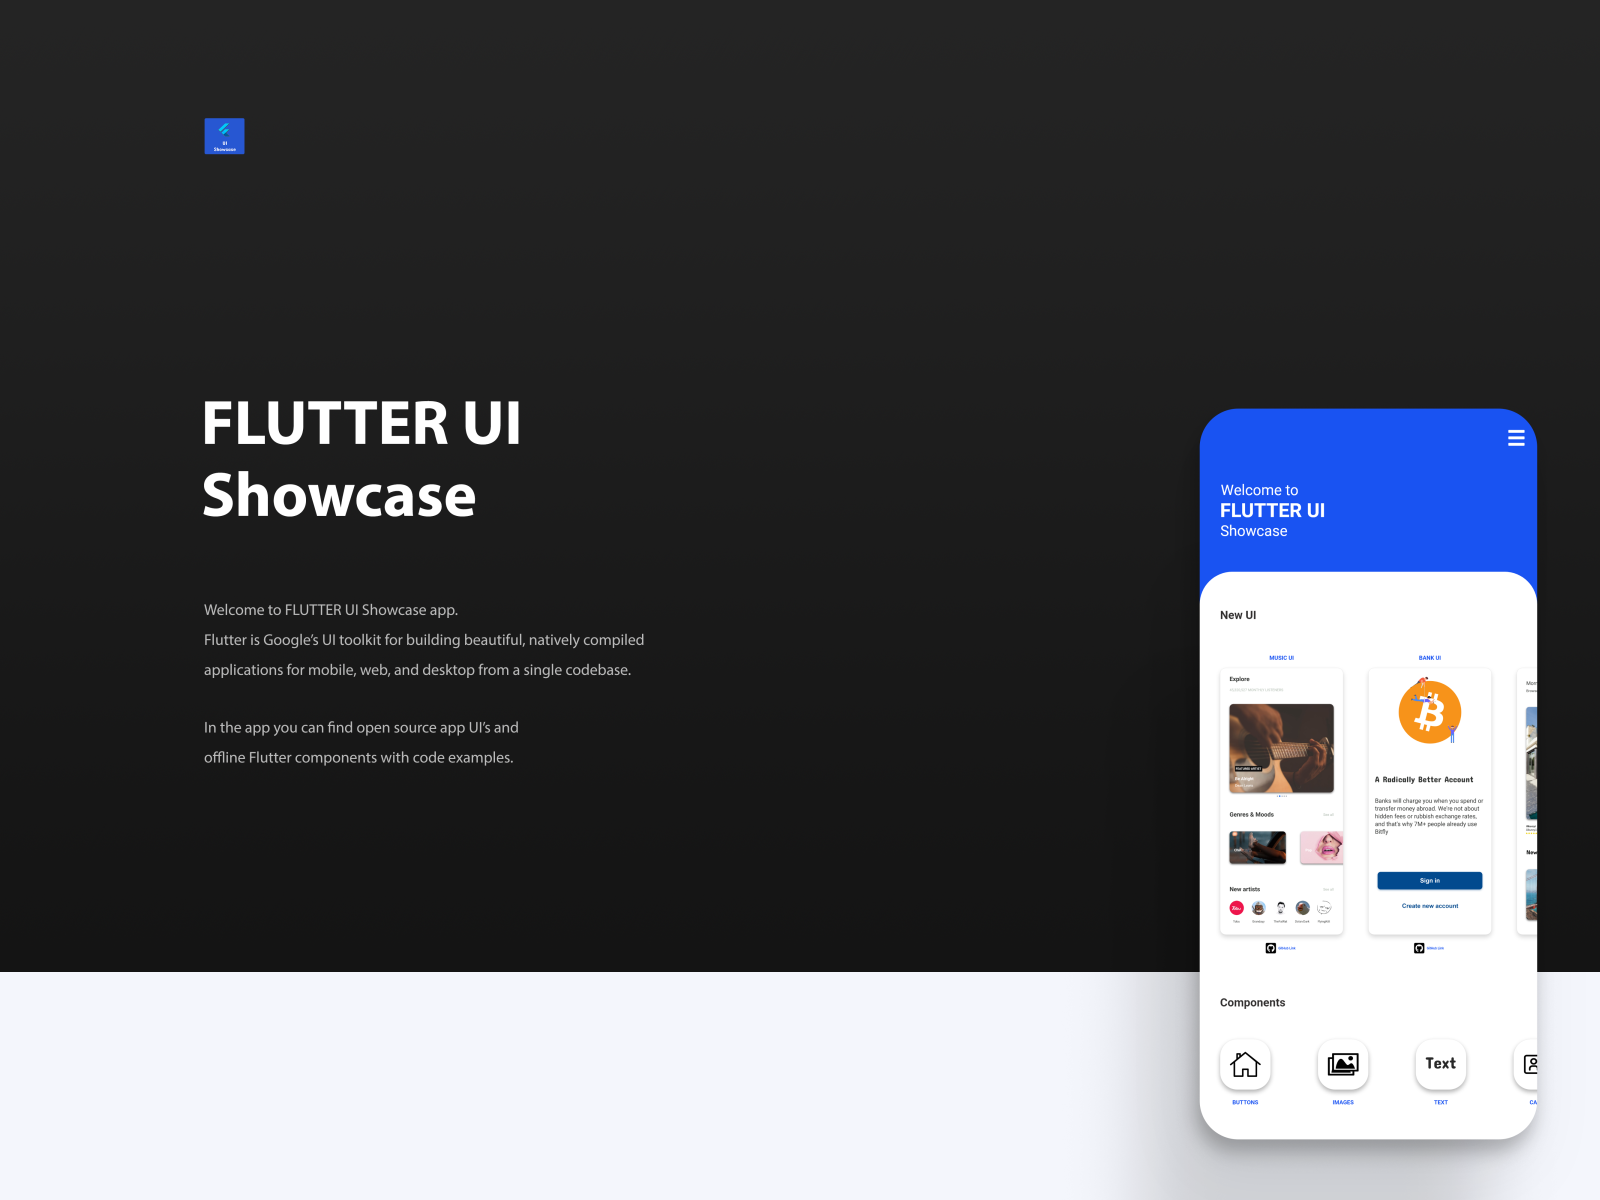 FLUTTER UI Showcase by Kasiits on Dribbble